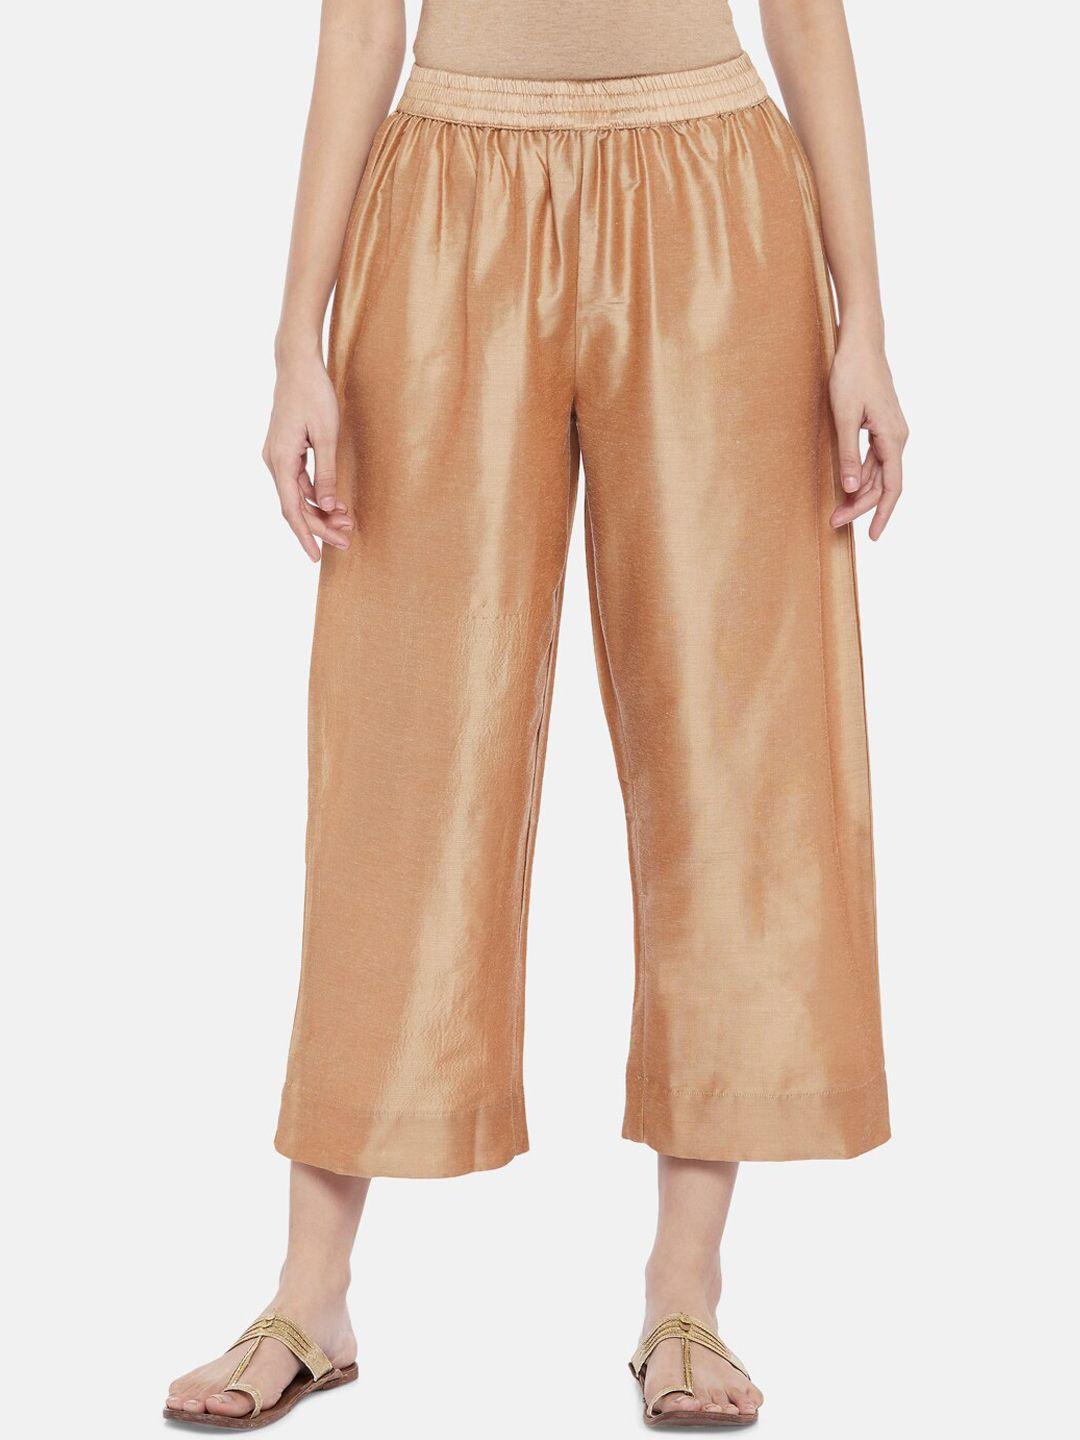 rangmanch by pantaloons woman gold-toned culottes trousers